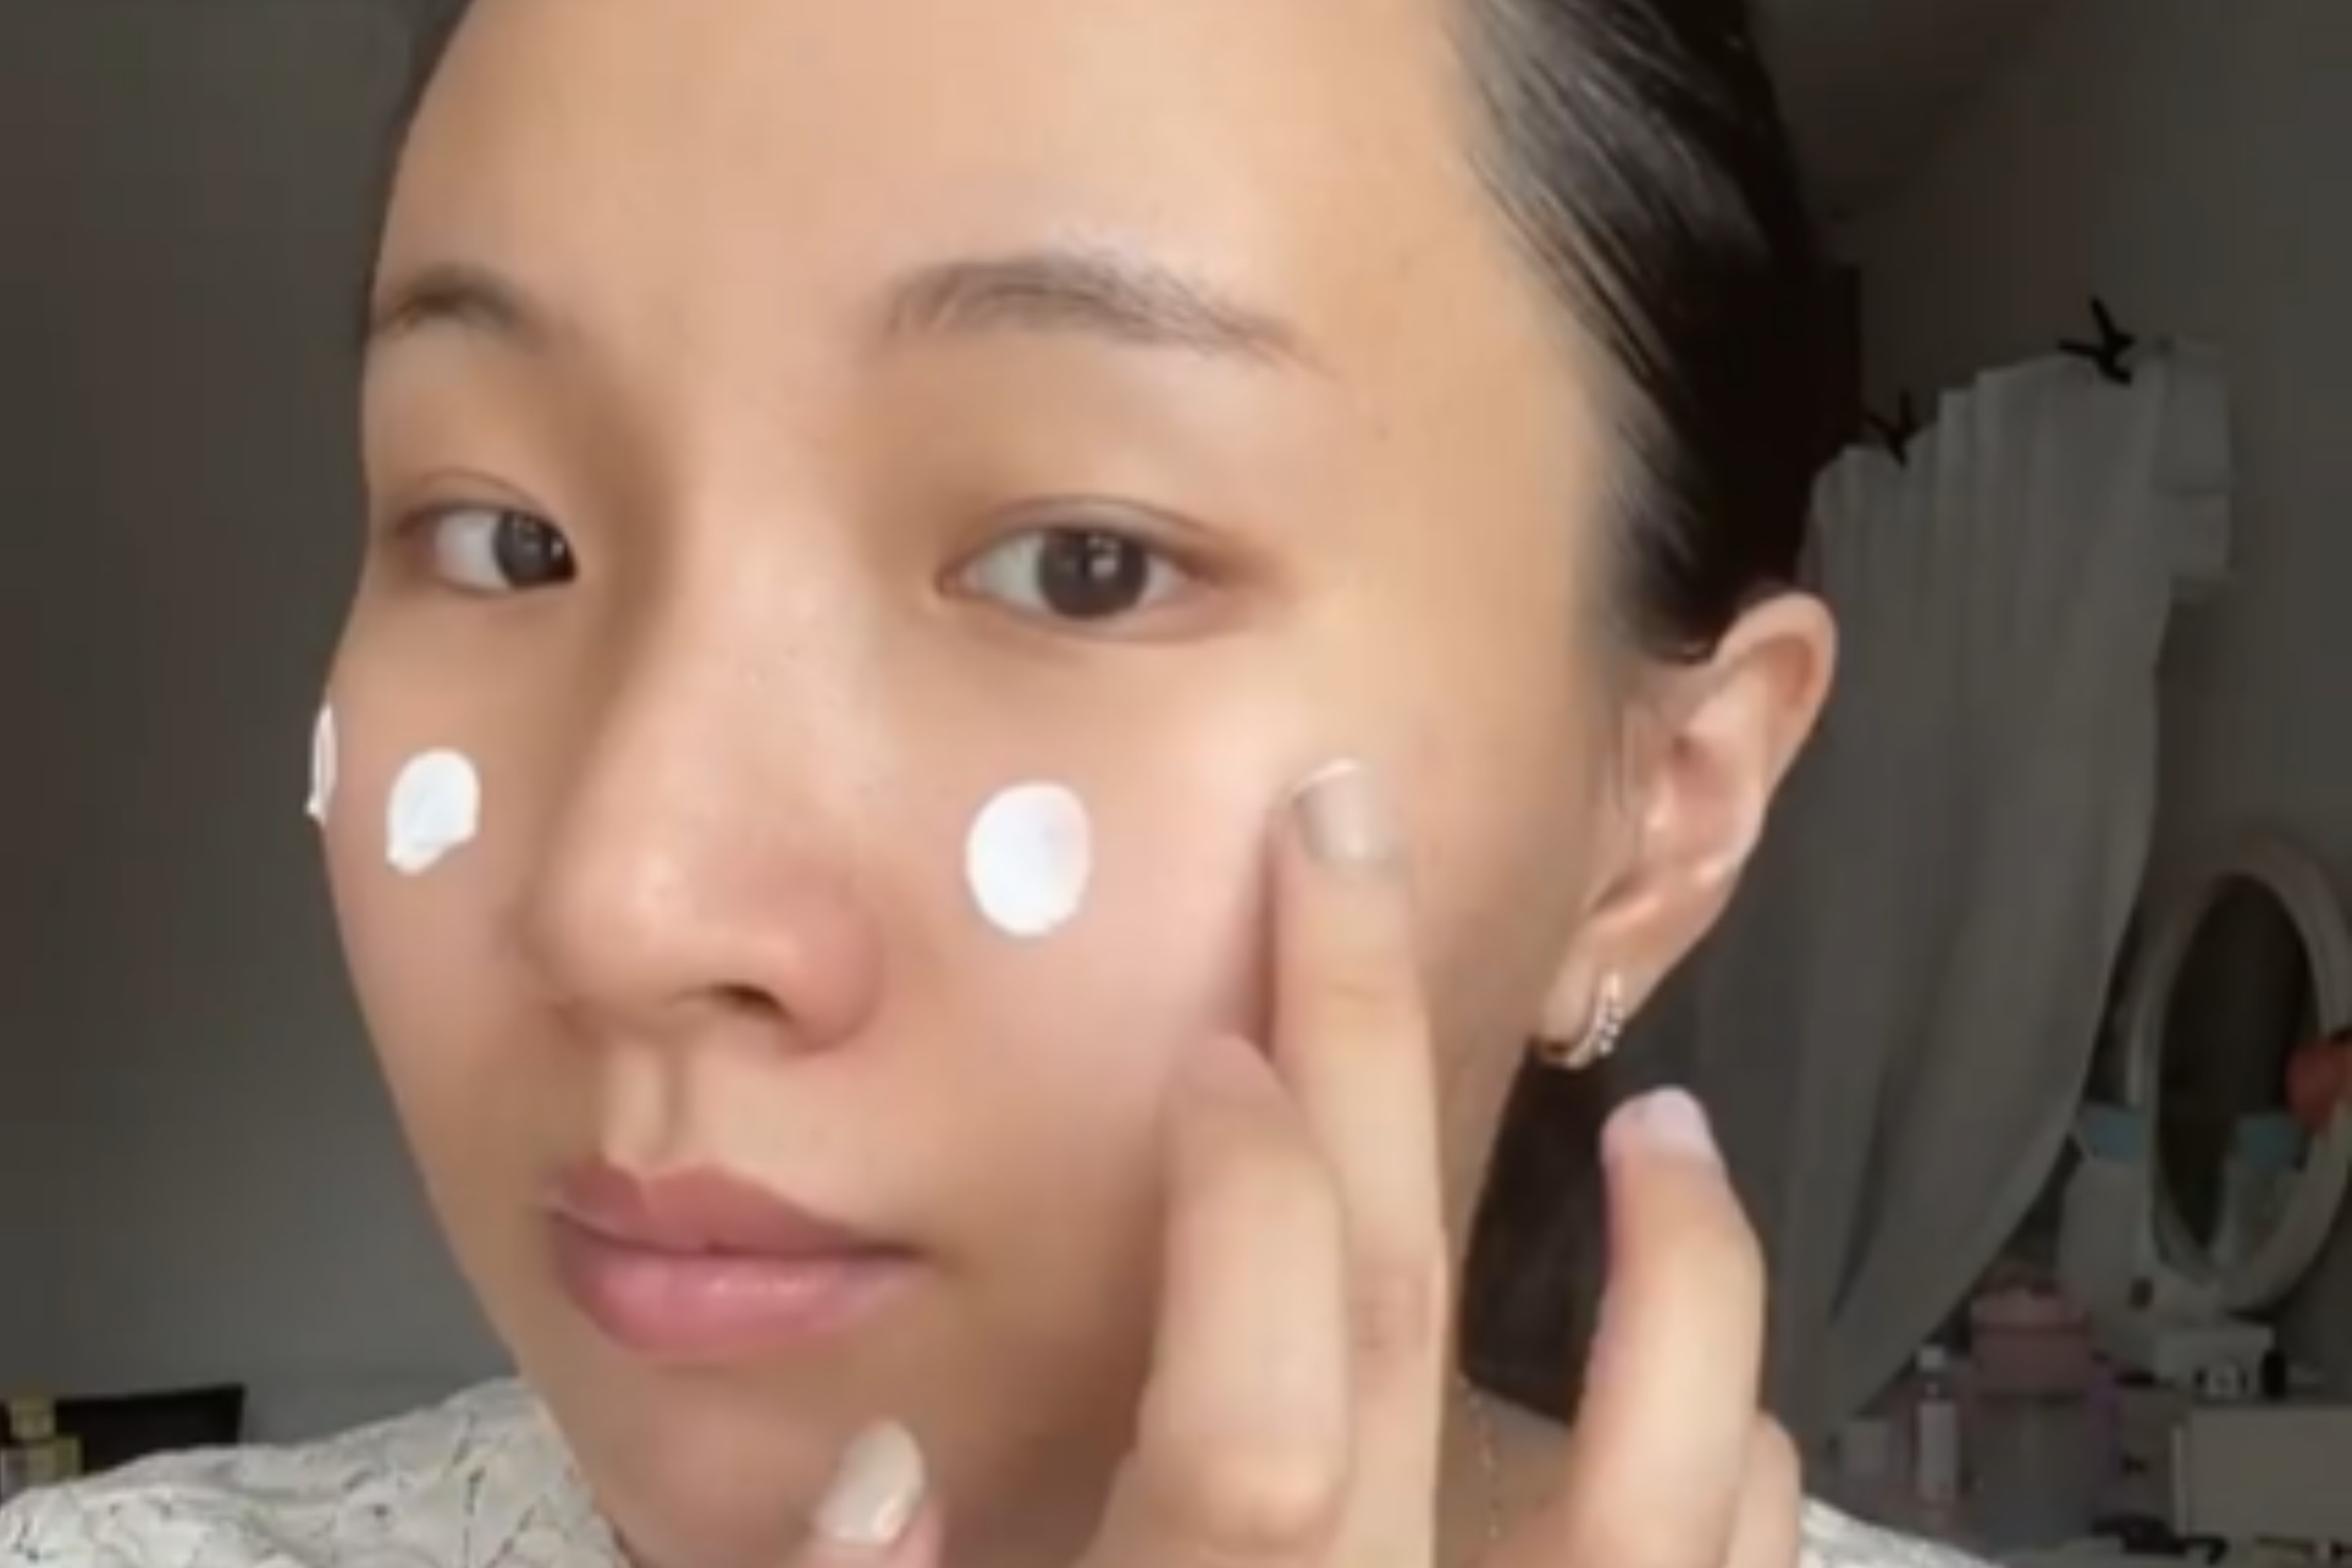 Laneige taps Reddit to reach skin-care enthusiasts - Glossy